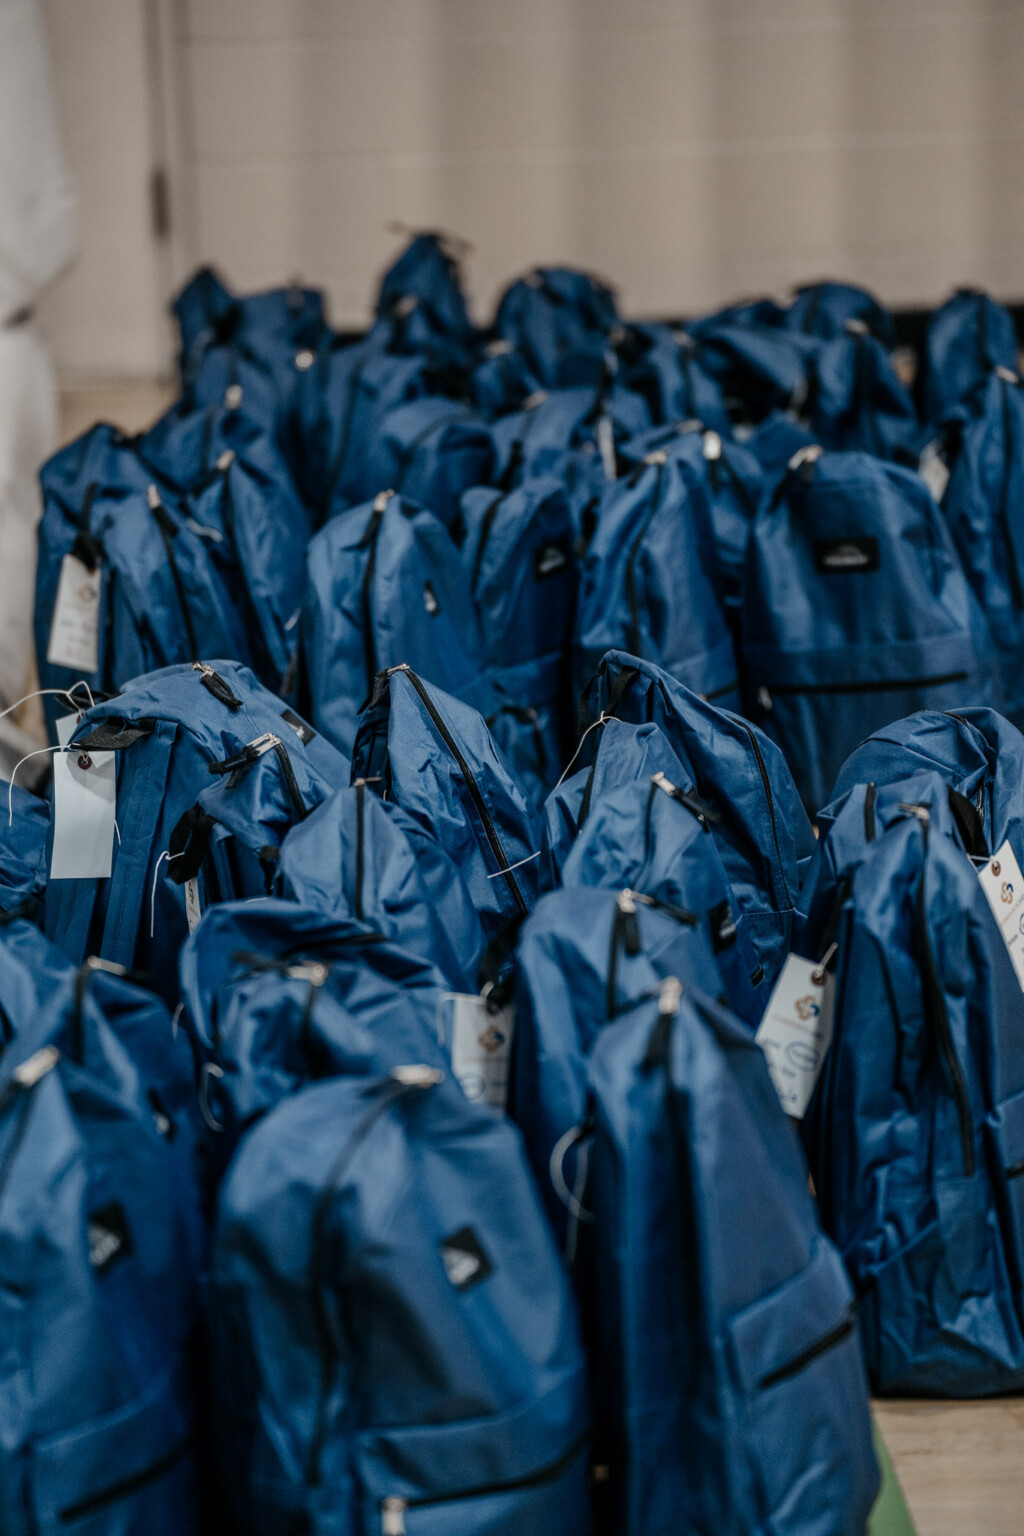 200,000th Comfort Case® Packed and Distributed to Support Local Youth in Foster Care